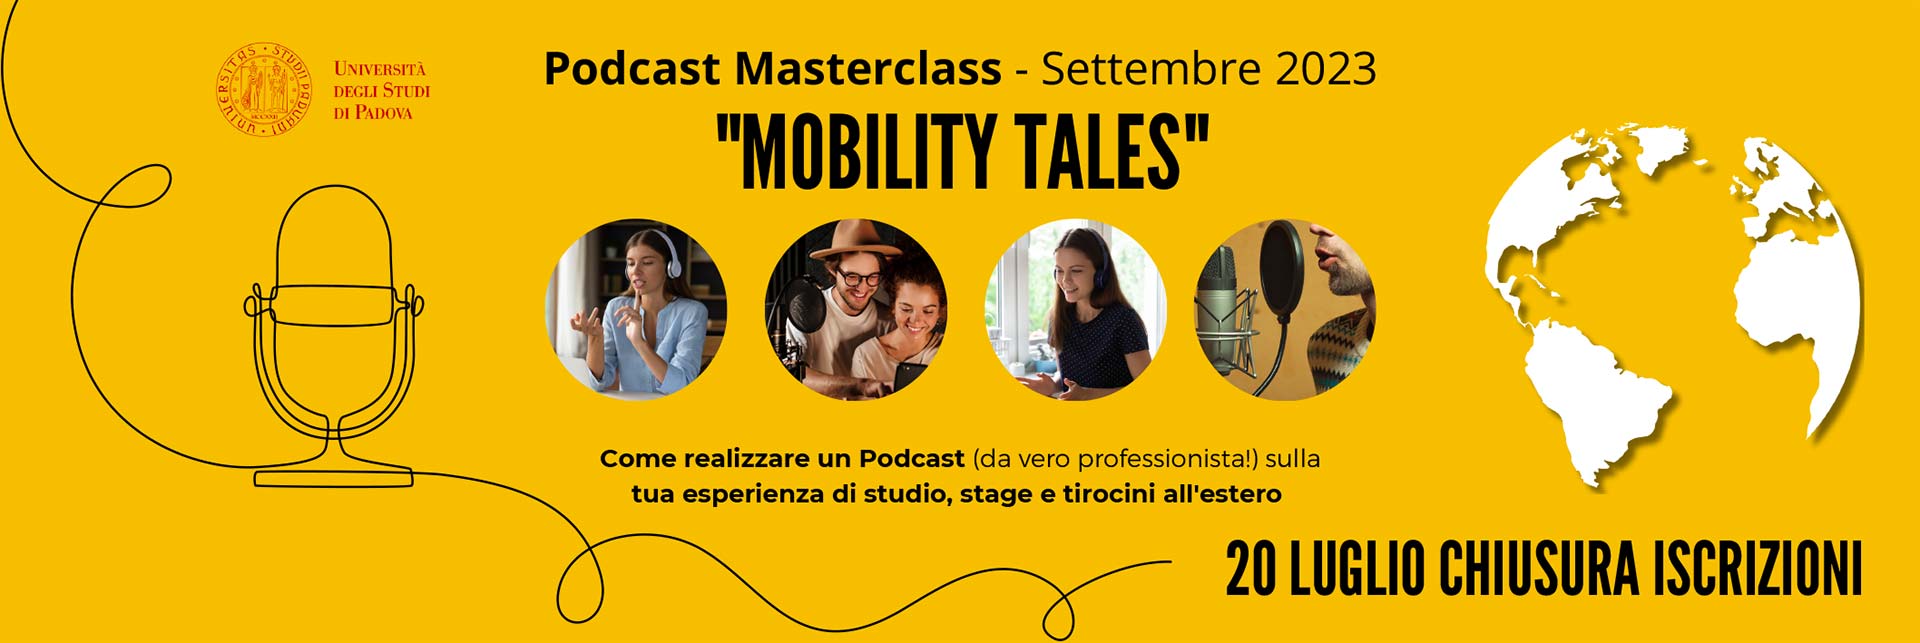 Mobility tales podcast masterclass